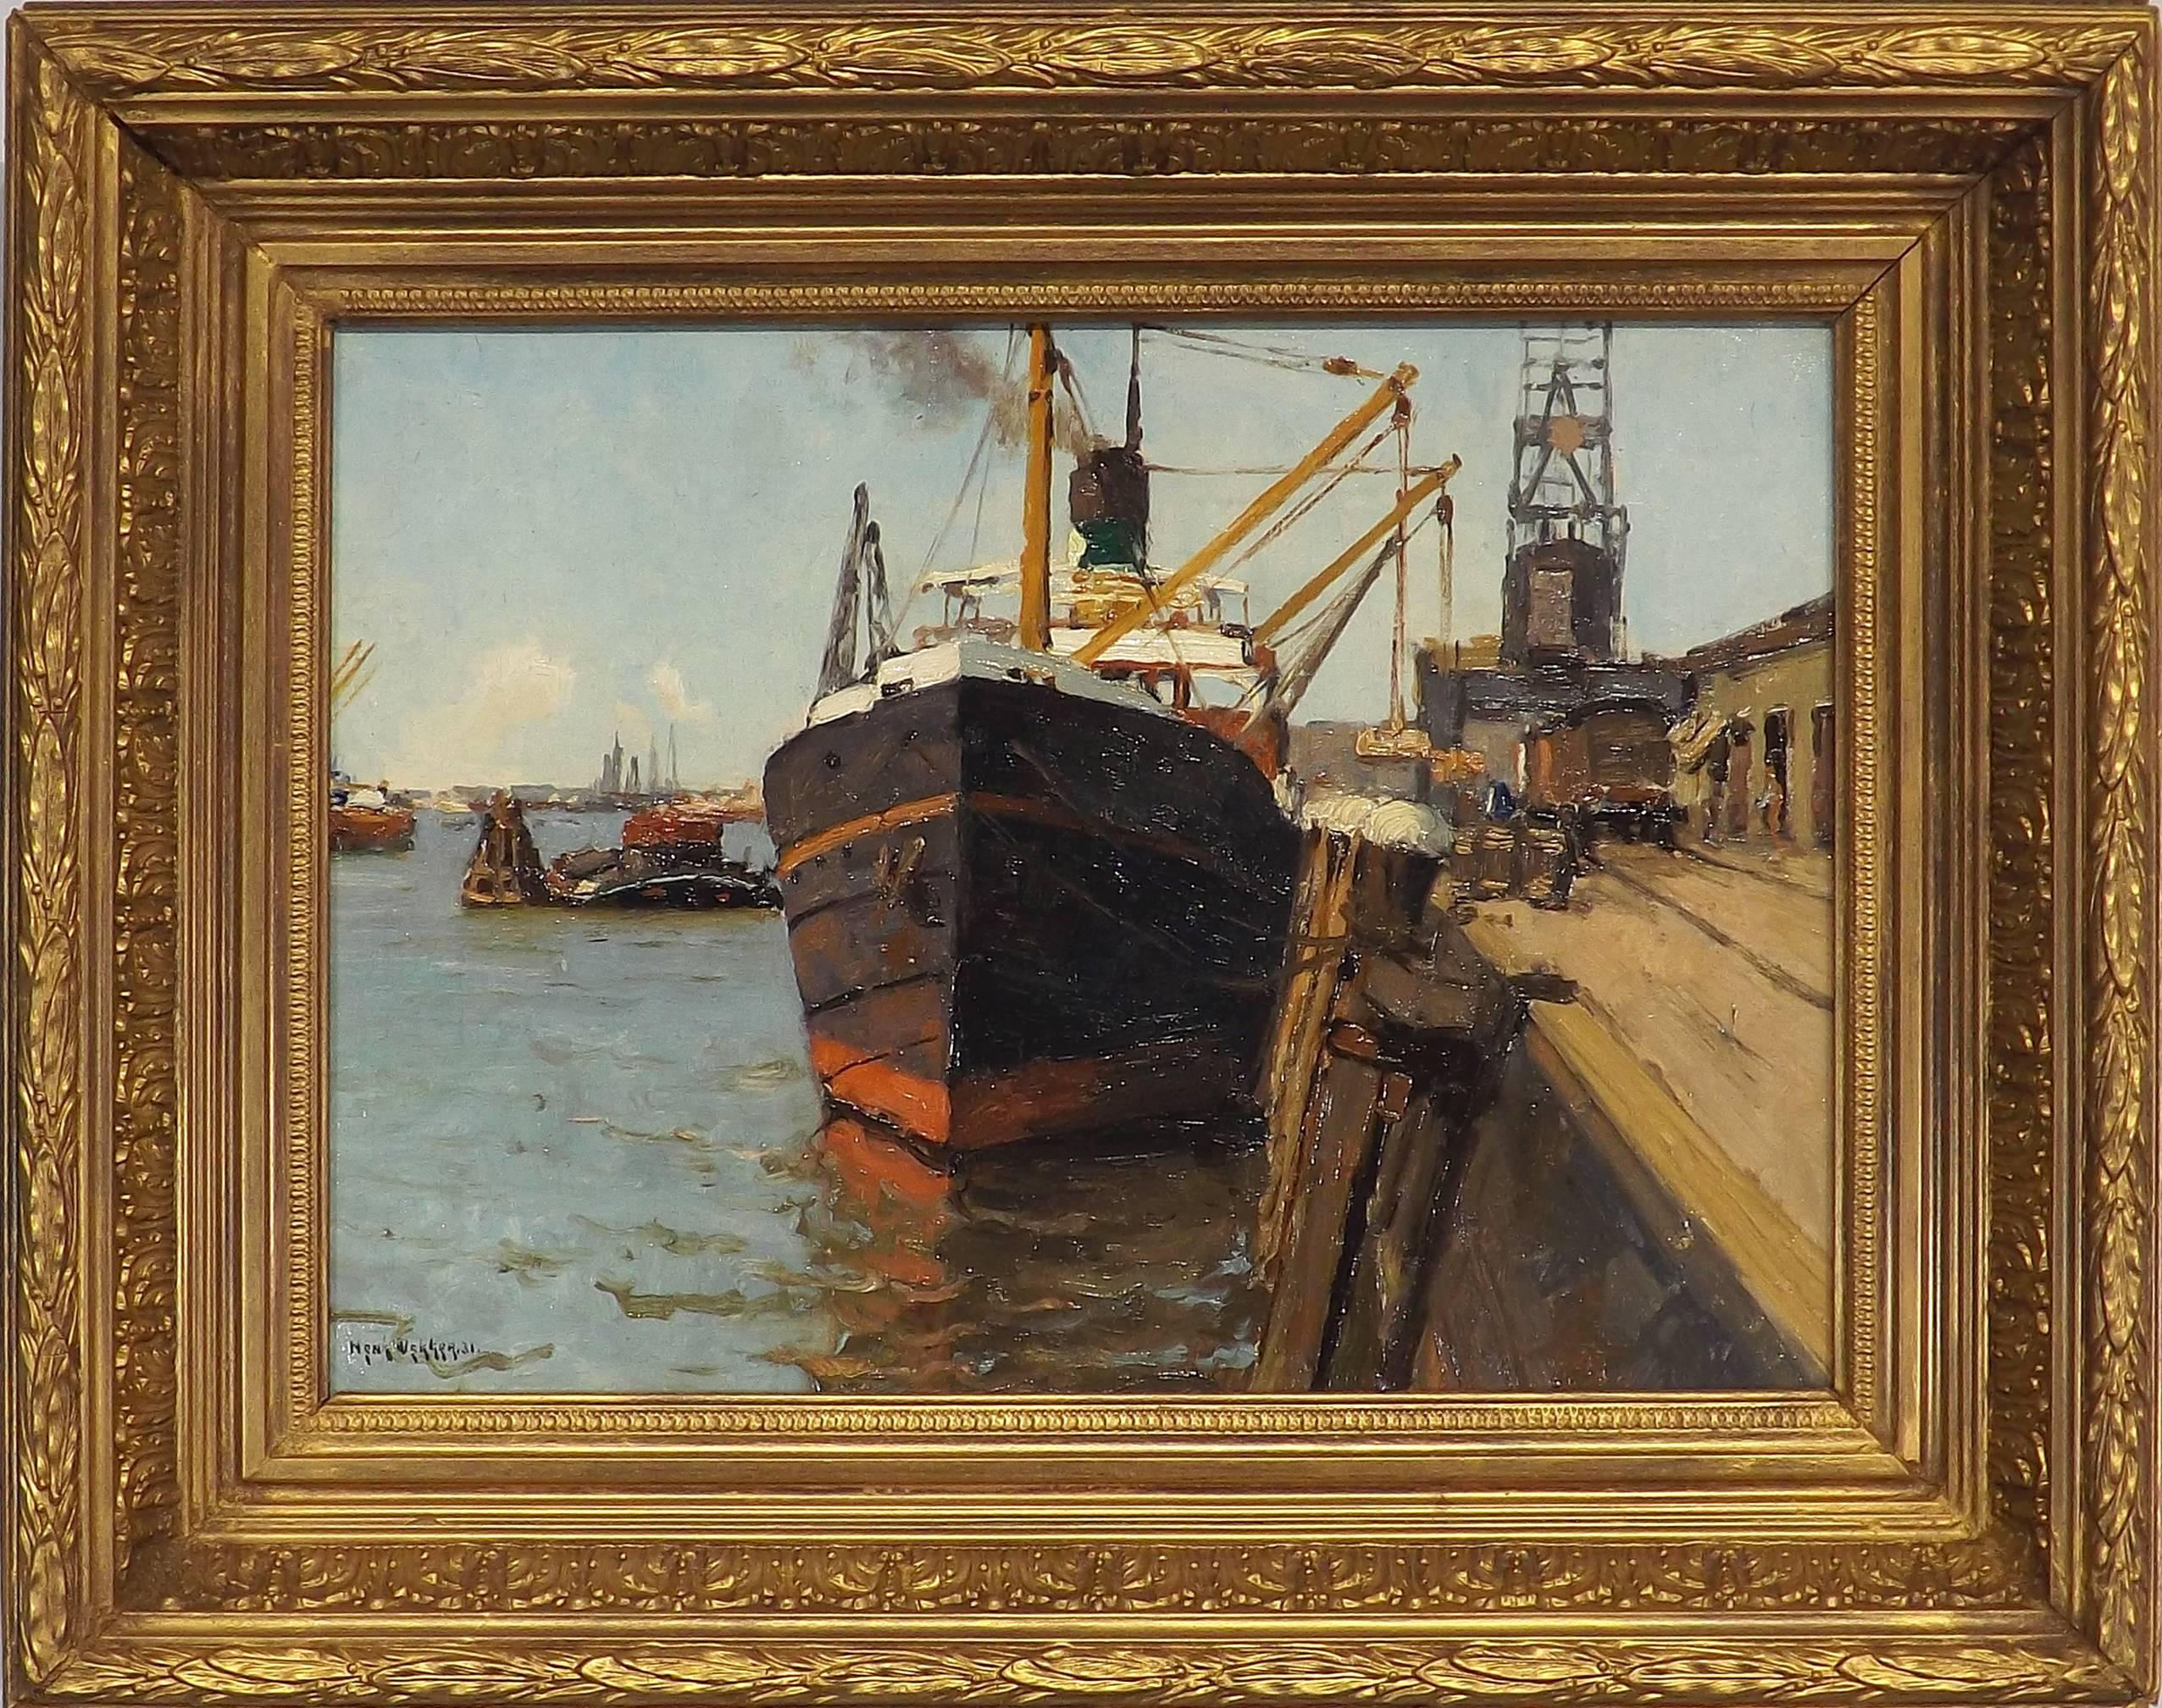 A very nice scene of a tramp steamer unloading cargo by Dutch maritime painter Henk Dekker (1897-1974). Signed lower left and dated '31. Beautifully framed in a gilt period frame, this oil on canvas measures 16 3/4 inches tall and 20 3/4 inches